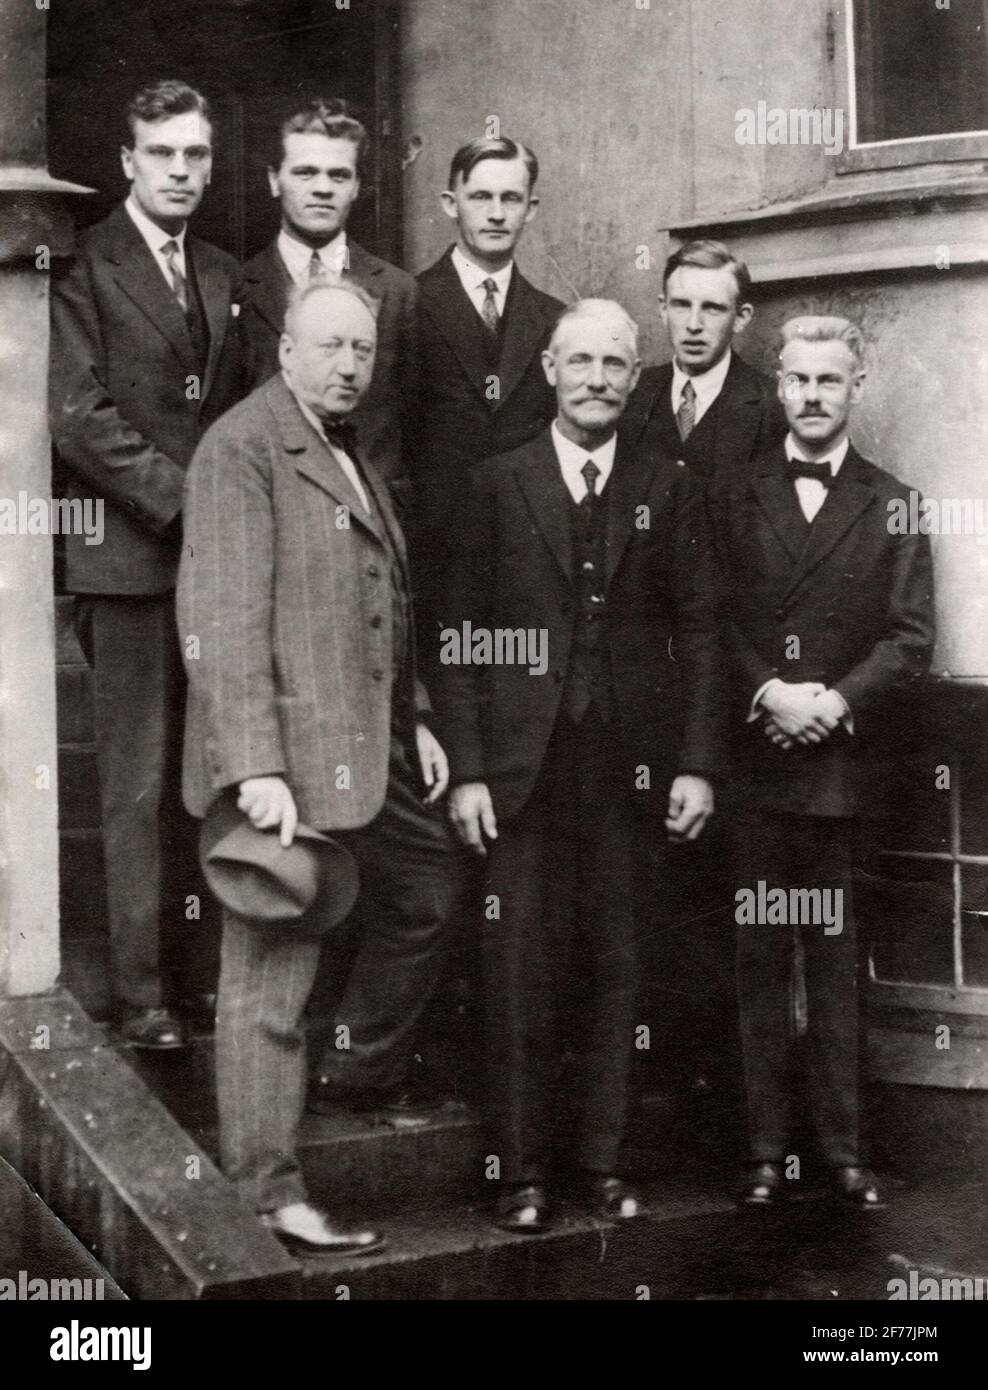 Men's Society on stairs. At the bottom left of the picture, John Hertzberg stands. Other in the picture there are the gentlemen: Borelius (1889-1985, at the bottom right, professor of physics KTH), Rosenhall, Tullström, Gumston, Lindhe and Johnsson. (For more info: see additional text on the back of the image) Stock Photo